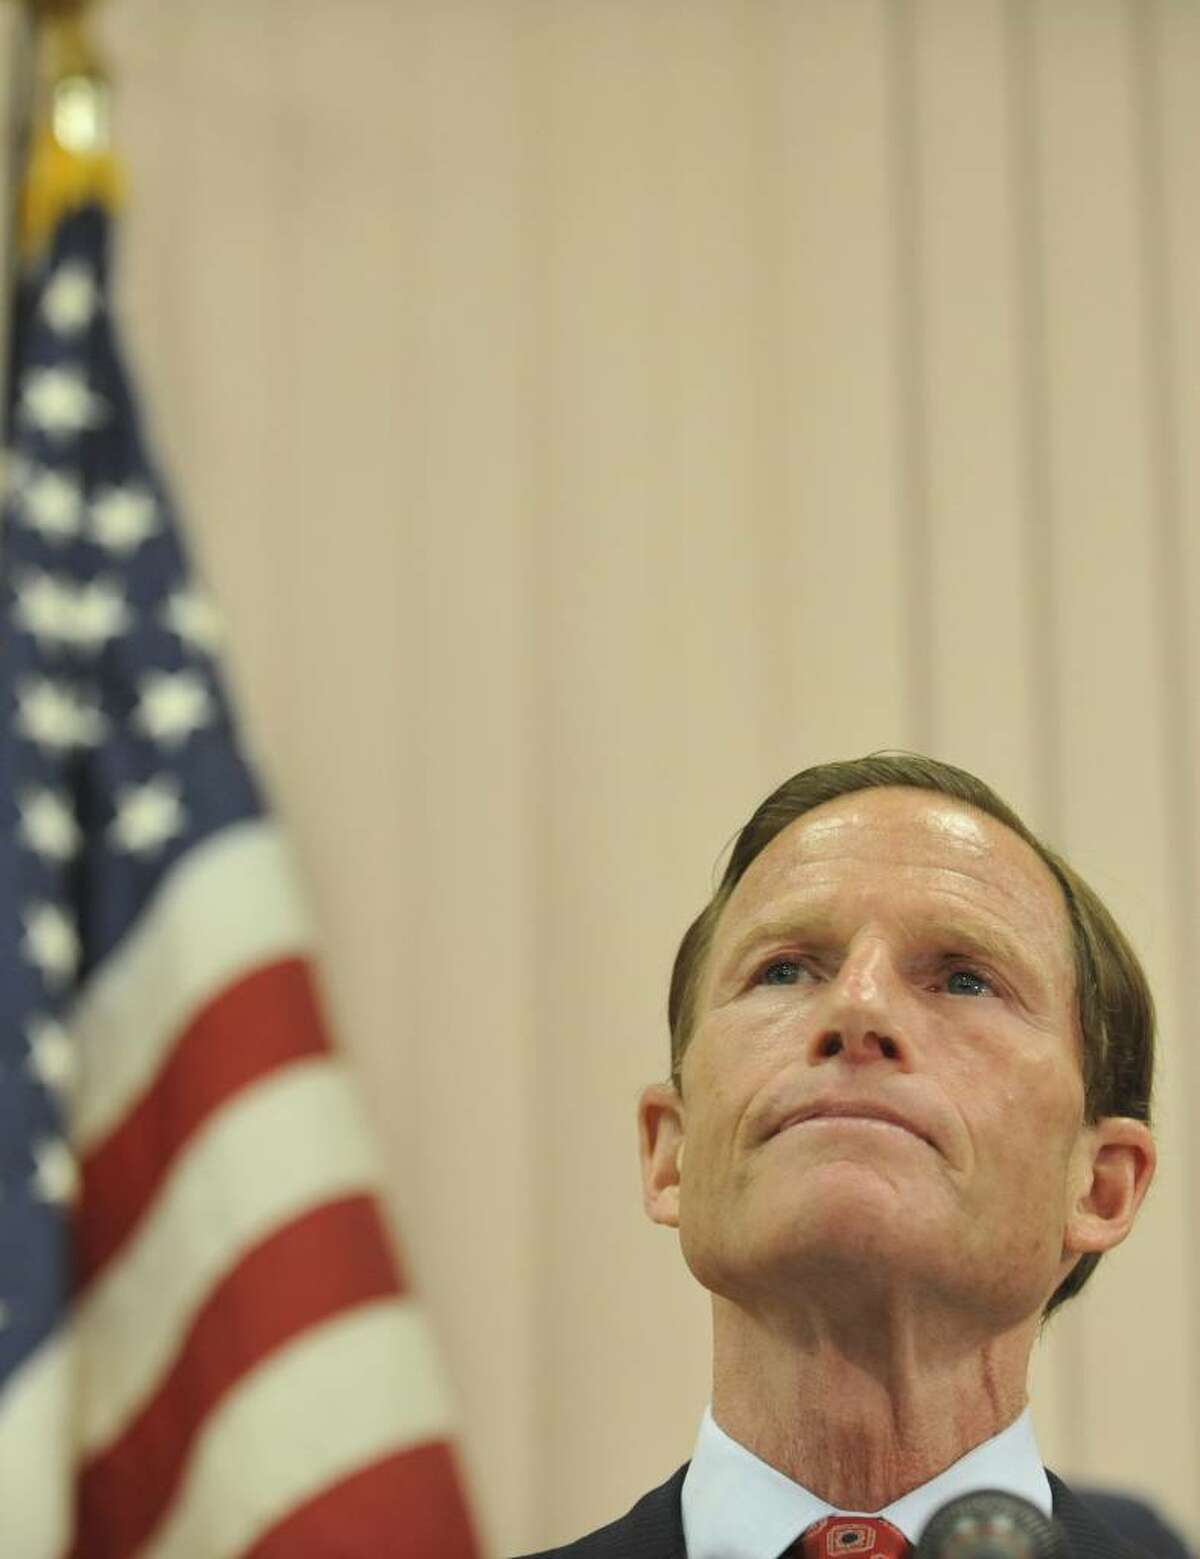 Connecticut Attorney General and Democratic candidate for U.S. Senate Richard Blumenthal addresses a report that he has misstated his military service during the Vietnam War at a news conference in West Hartford, Conn., Tuesday, May 18, 2010. (AP Photo/Jessica Hill)